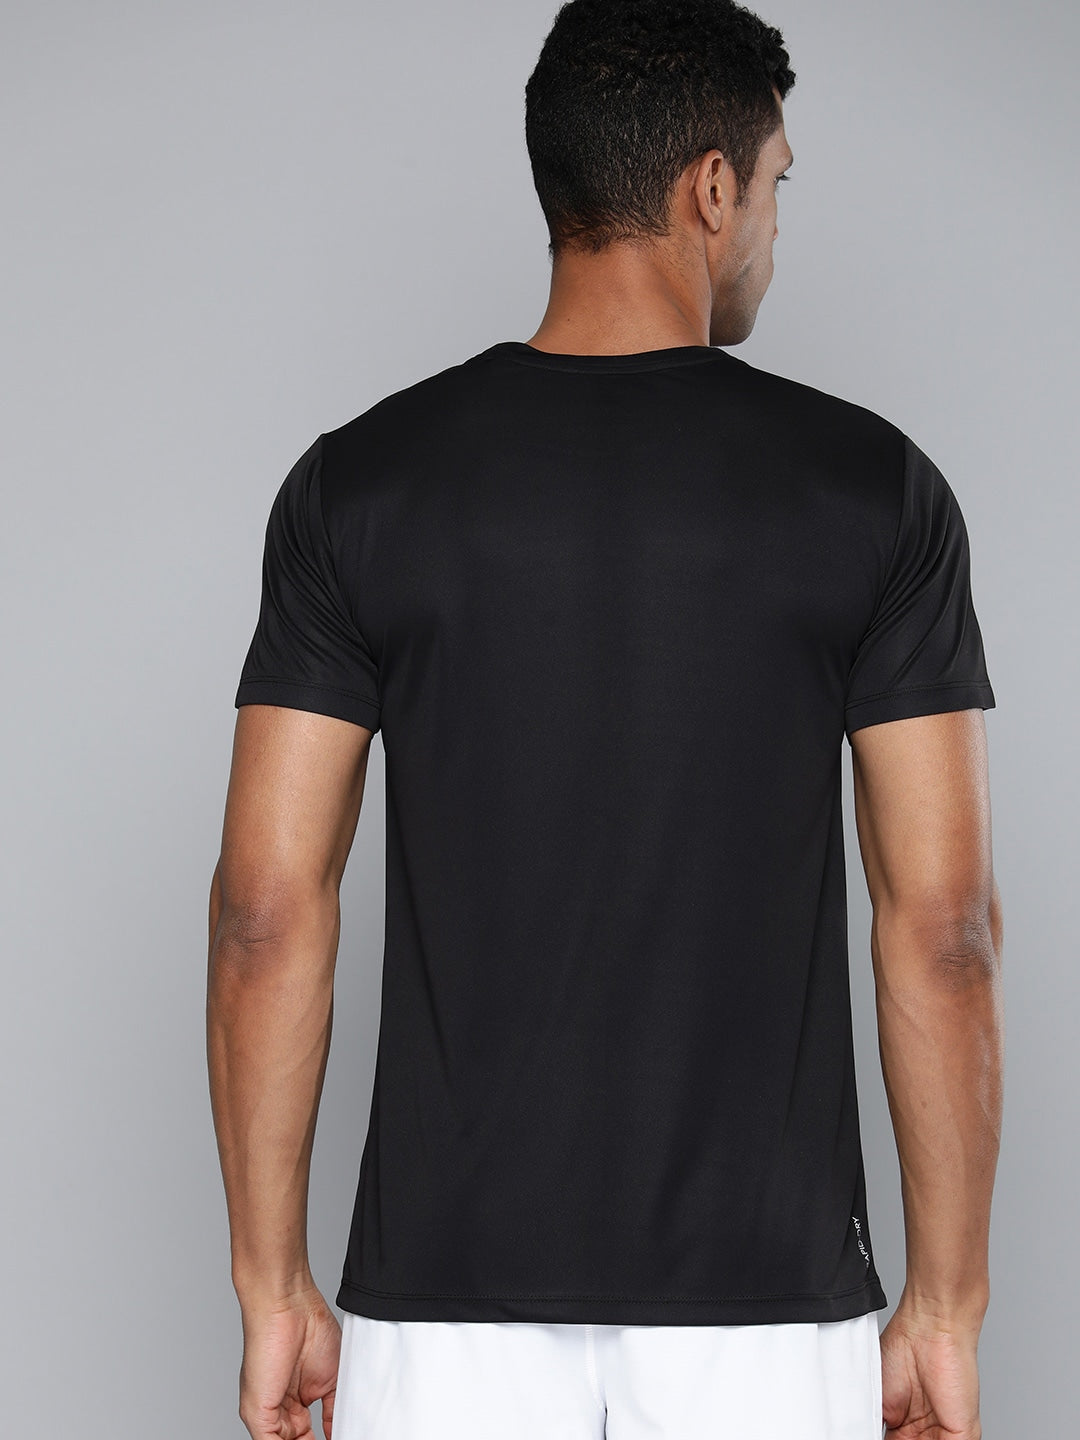 HRX by Hrithik Roshan Solid Antimicrobial Training T-shirt